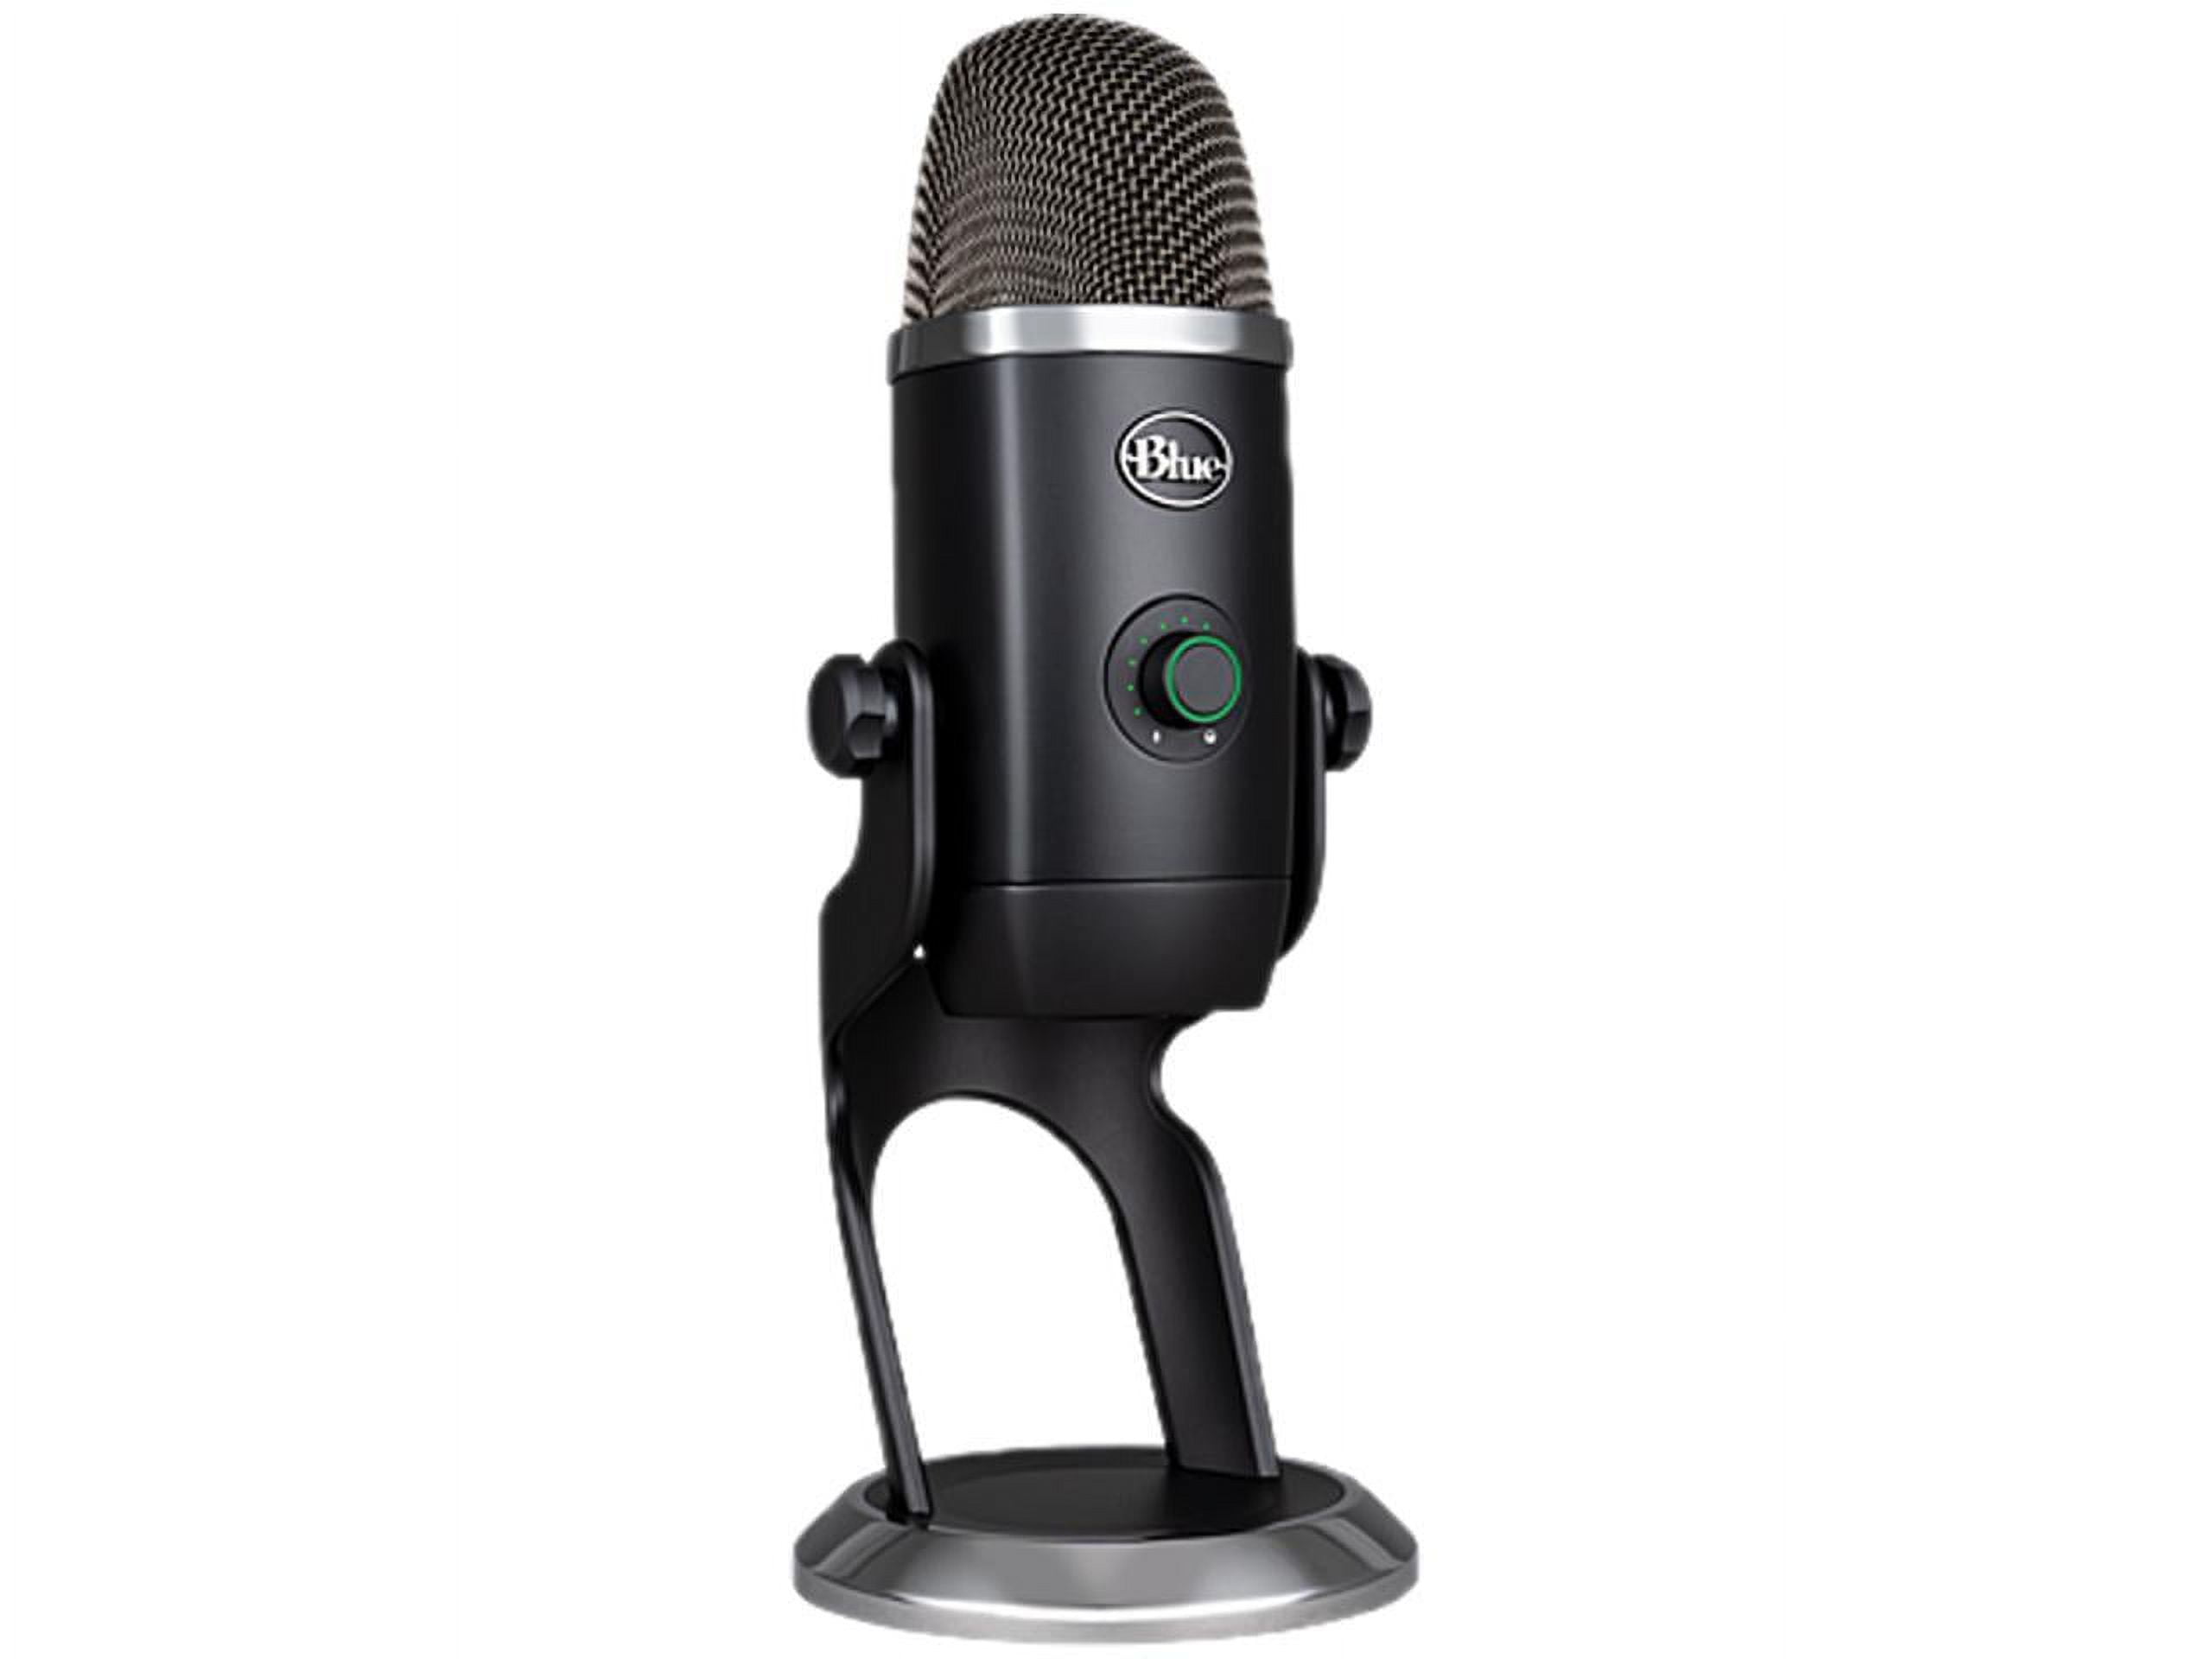 ASMR Microphones: A Review of the Yeti Microphone for ASMR Artists